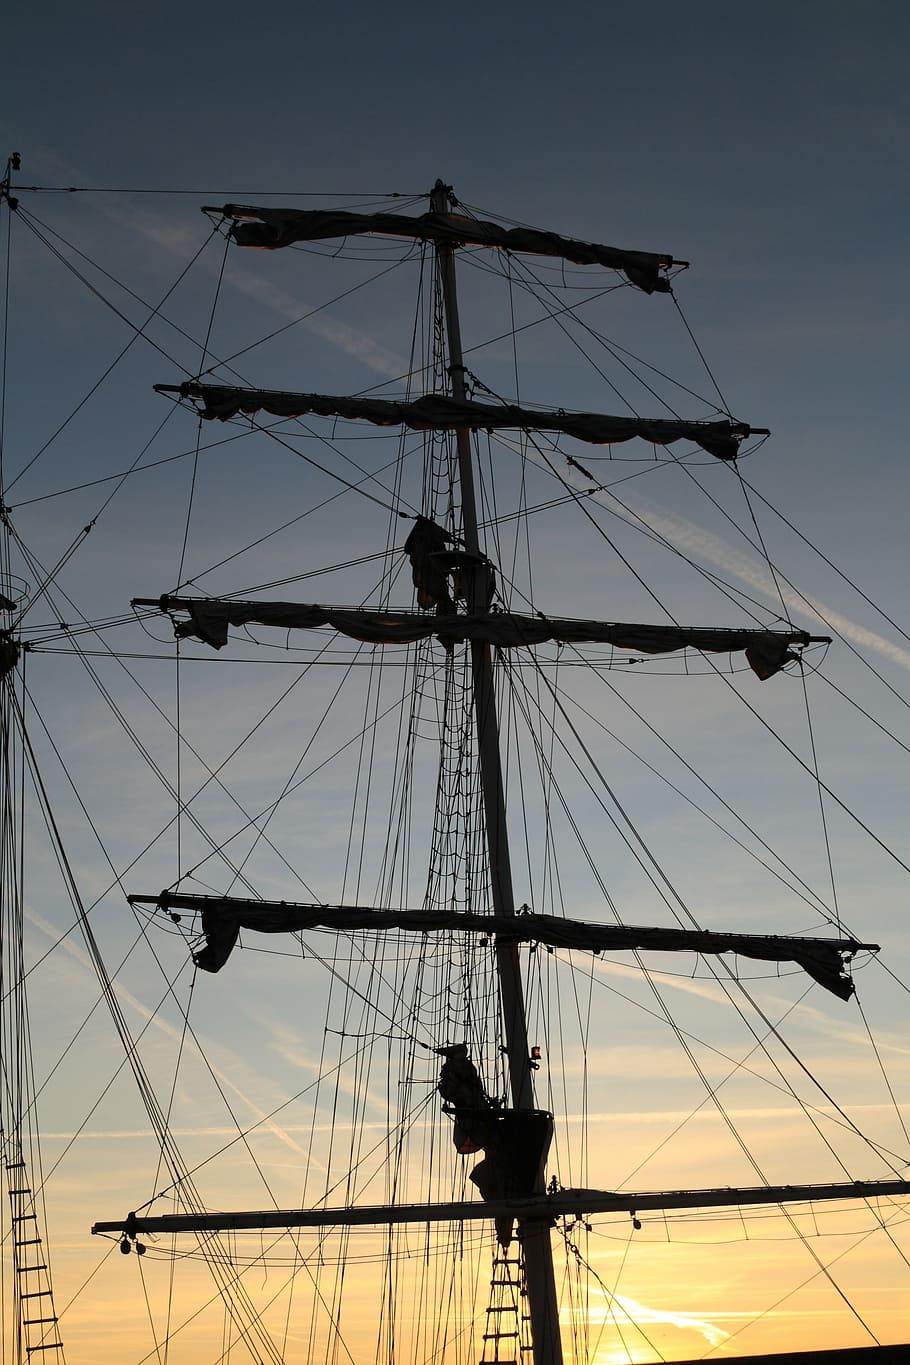 netherlands, harlingen, sunset, sail, mast, boat, rigging, low angle view, sky, silhouette